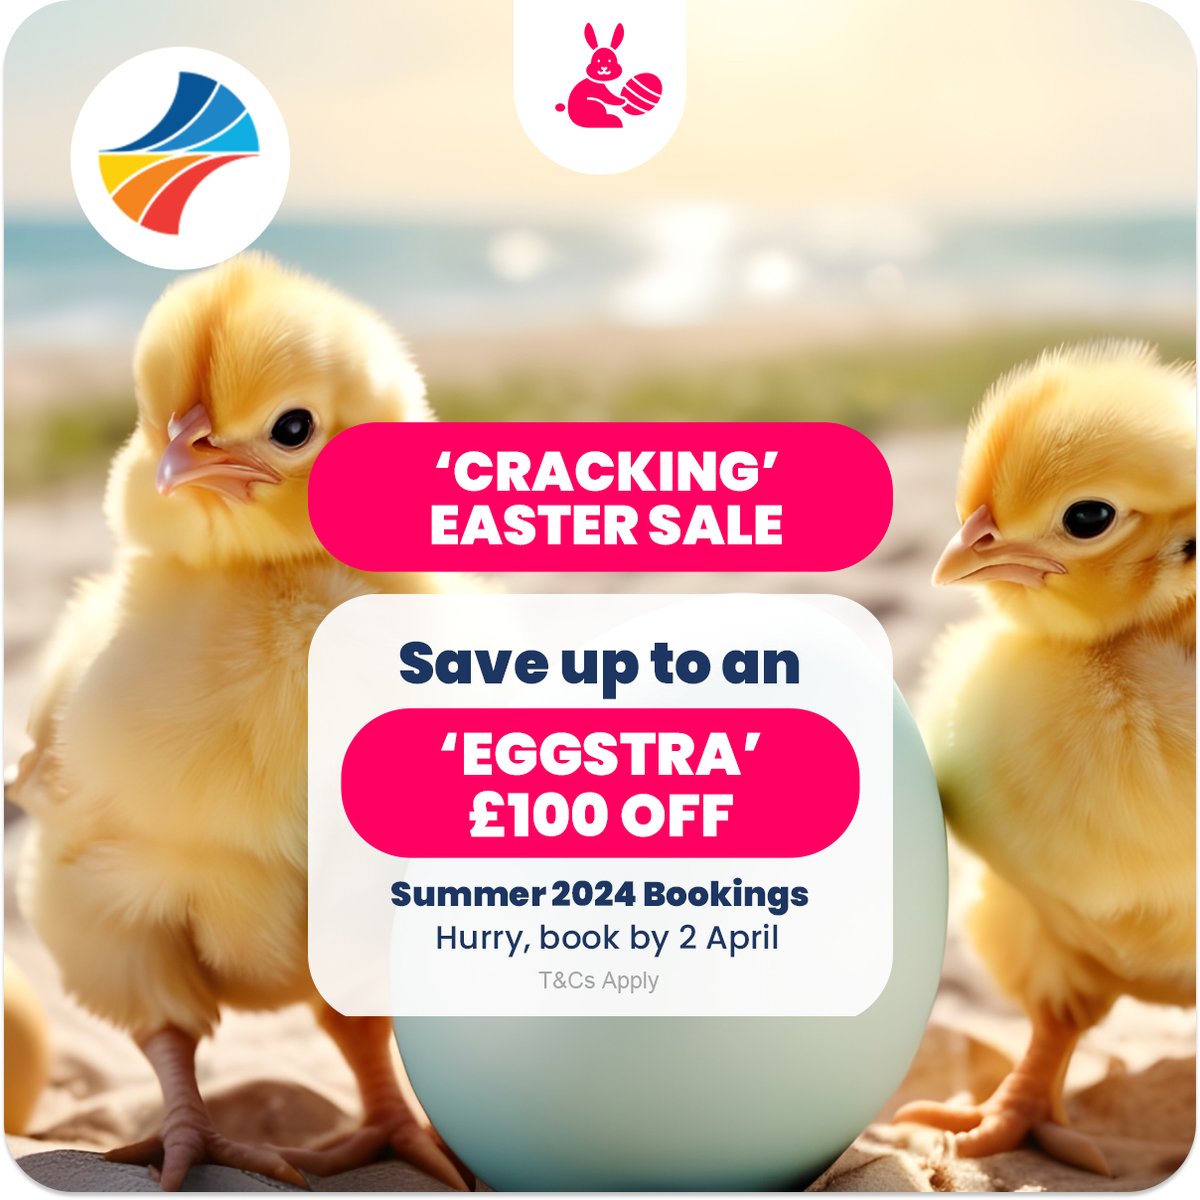 To celebrate Easter🐣, we’re having an Easter sale with discounts of up to £100 per booking off all of our summer 2024 holidays. This represents ‘eggscellent’ value for money! But hurry, the sale ends Tuesday 2nd April. 🐥 Get Your Discount Code 👉bit.ly/43kepfH